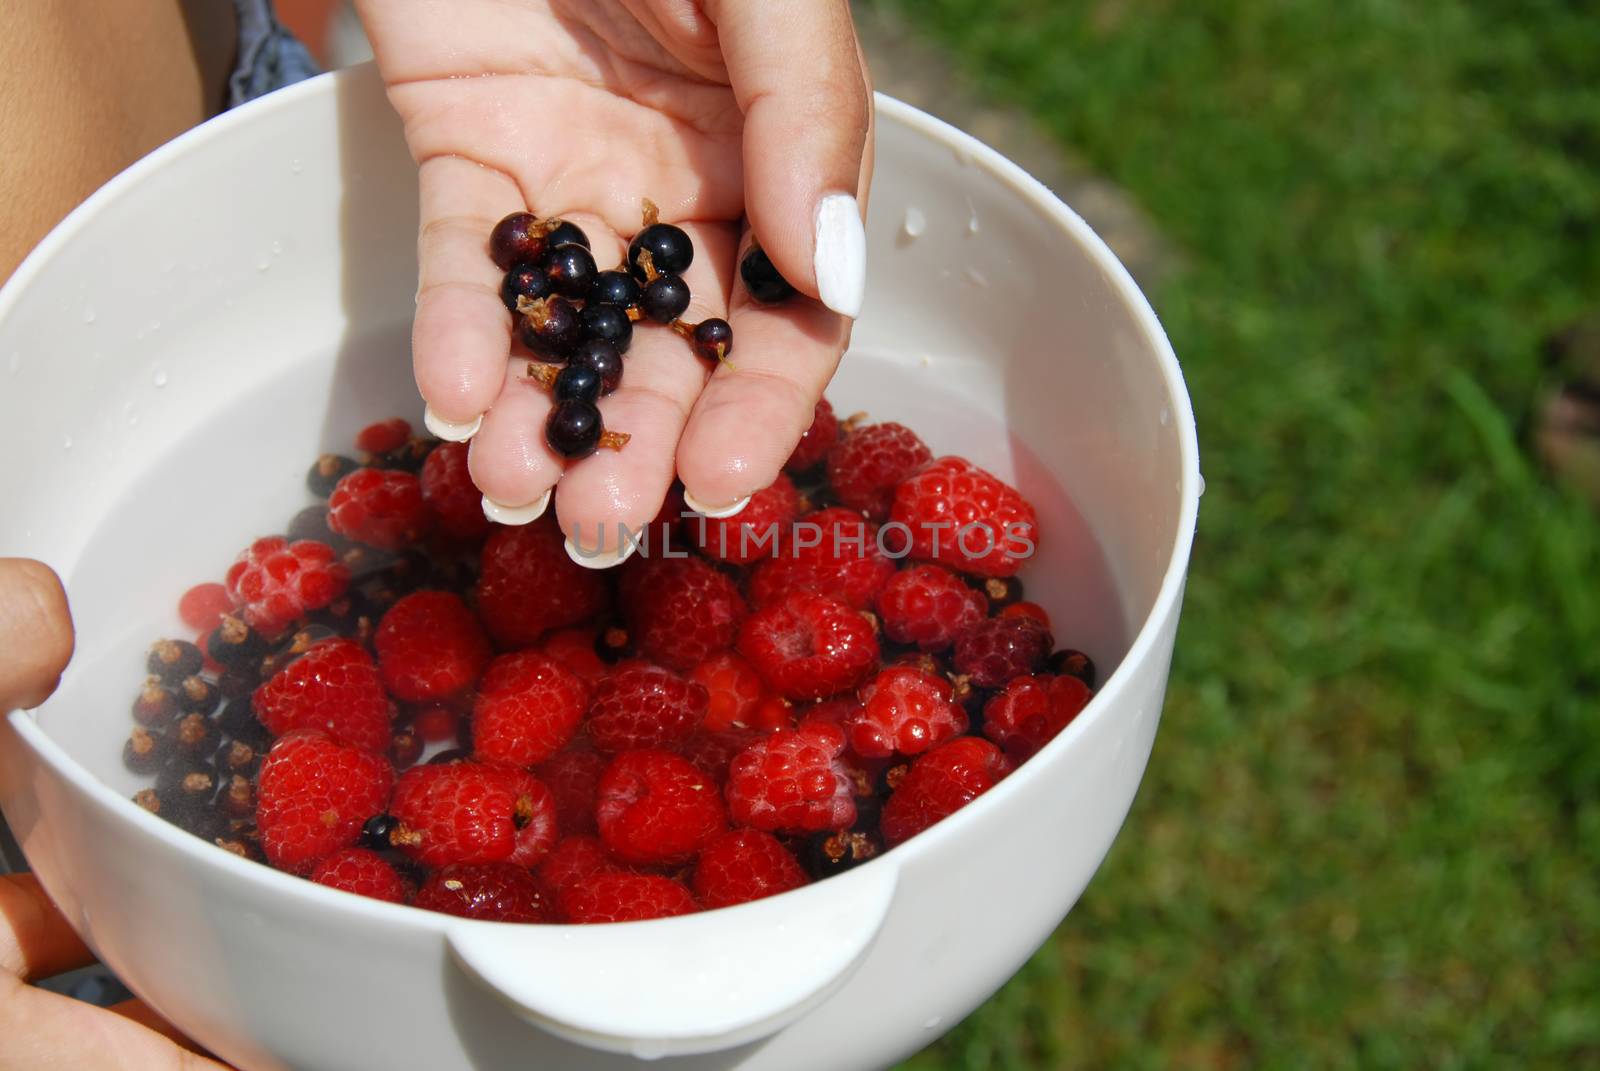 Holding black currants in the hand by simply